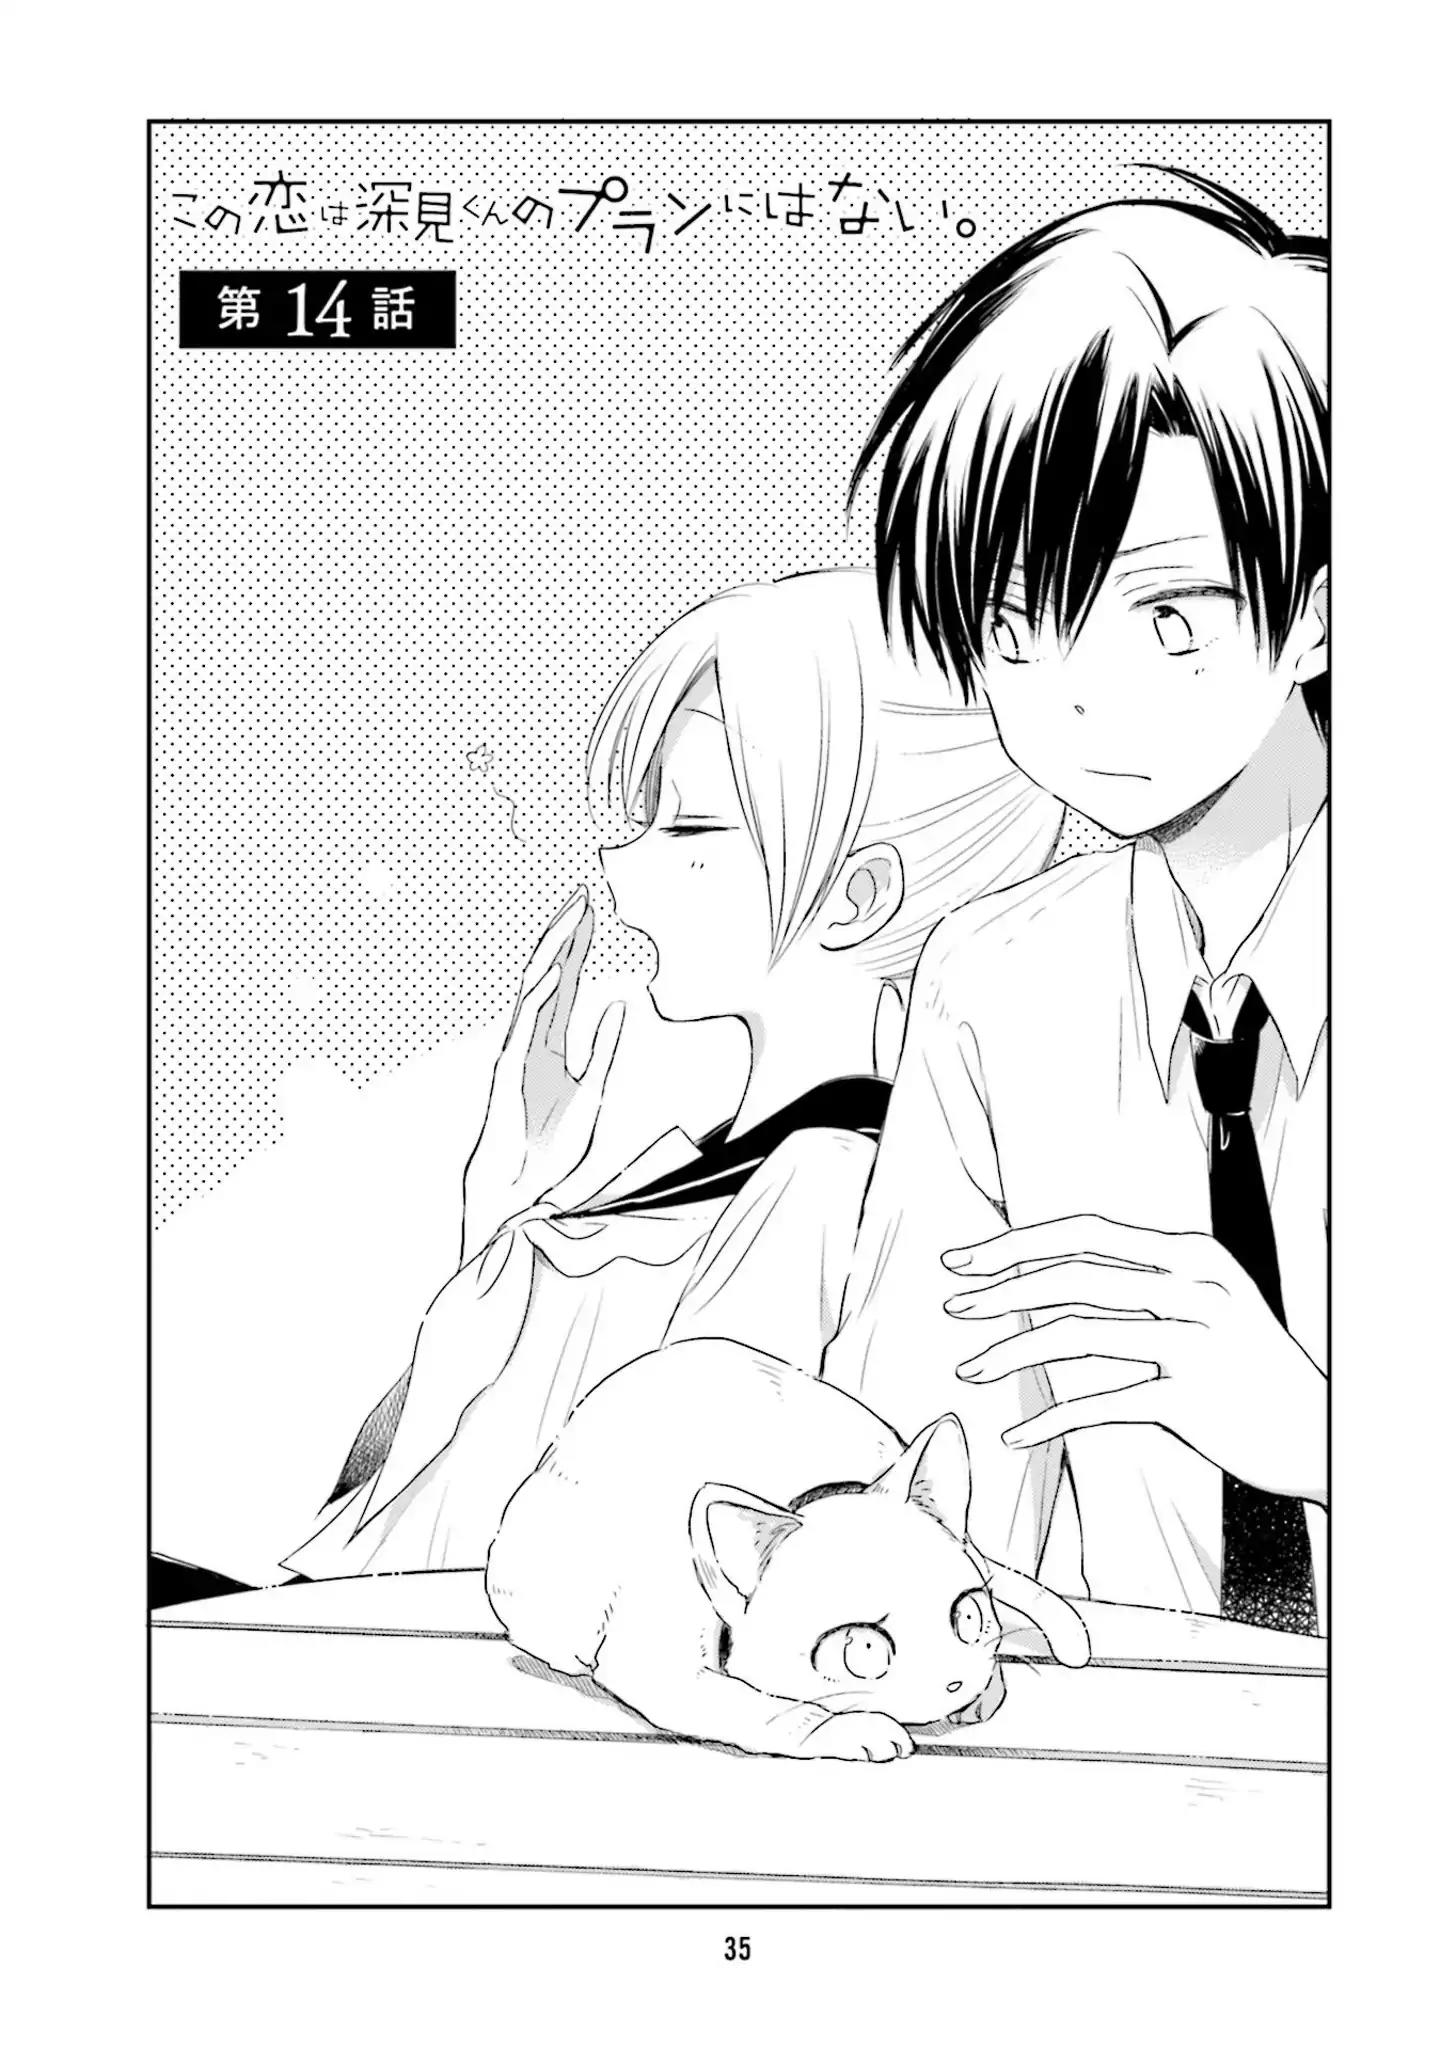 This Love Is Assumption Outside for Fukami Kun Vol.2 Chapter 14